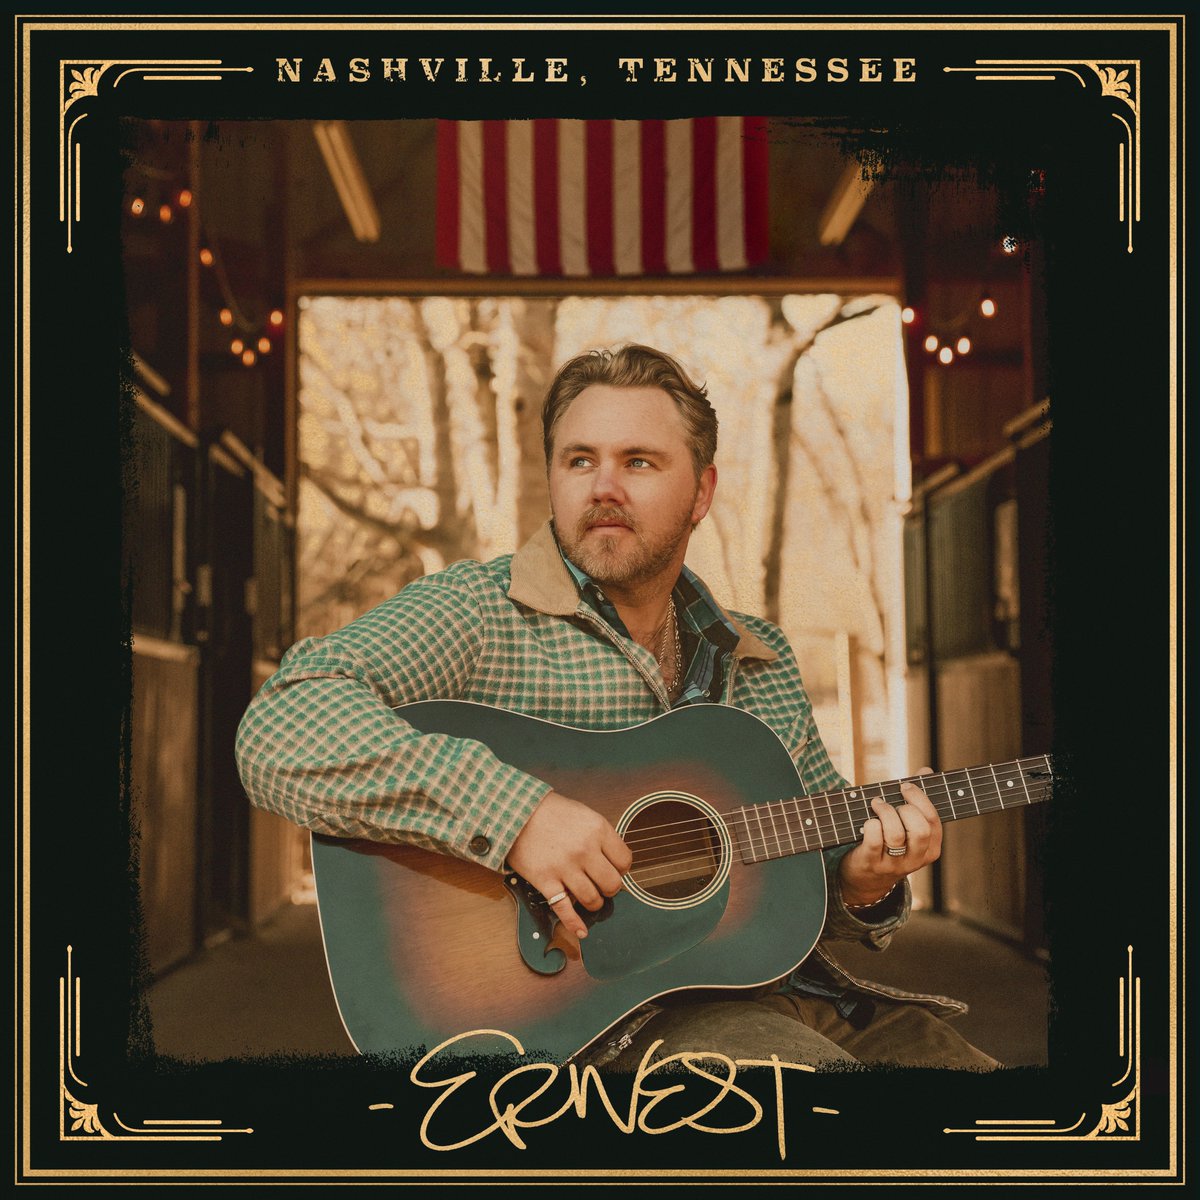 my album NASHVILLE, TENNESSEE is out now in homage to the music & city that raised me #LegalizeCountryMusic ernestofficial.lnk.to/NashvilleTN